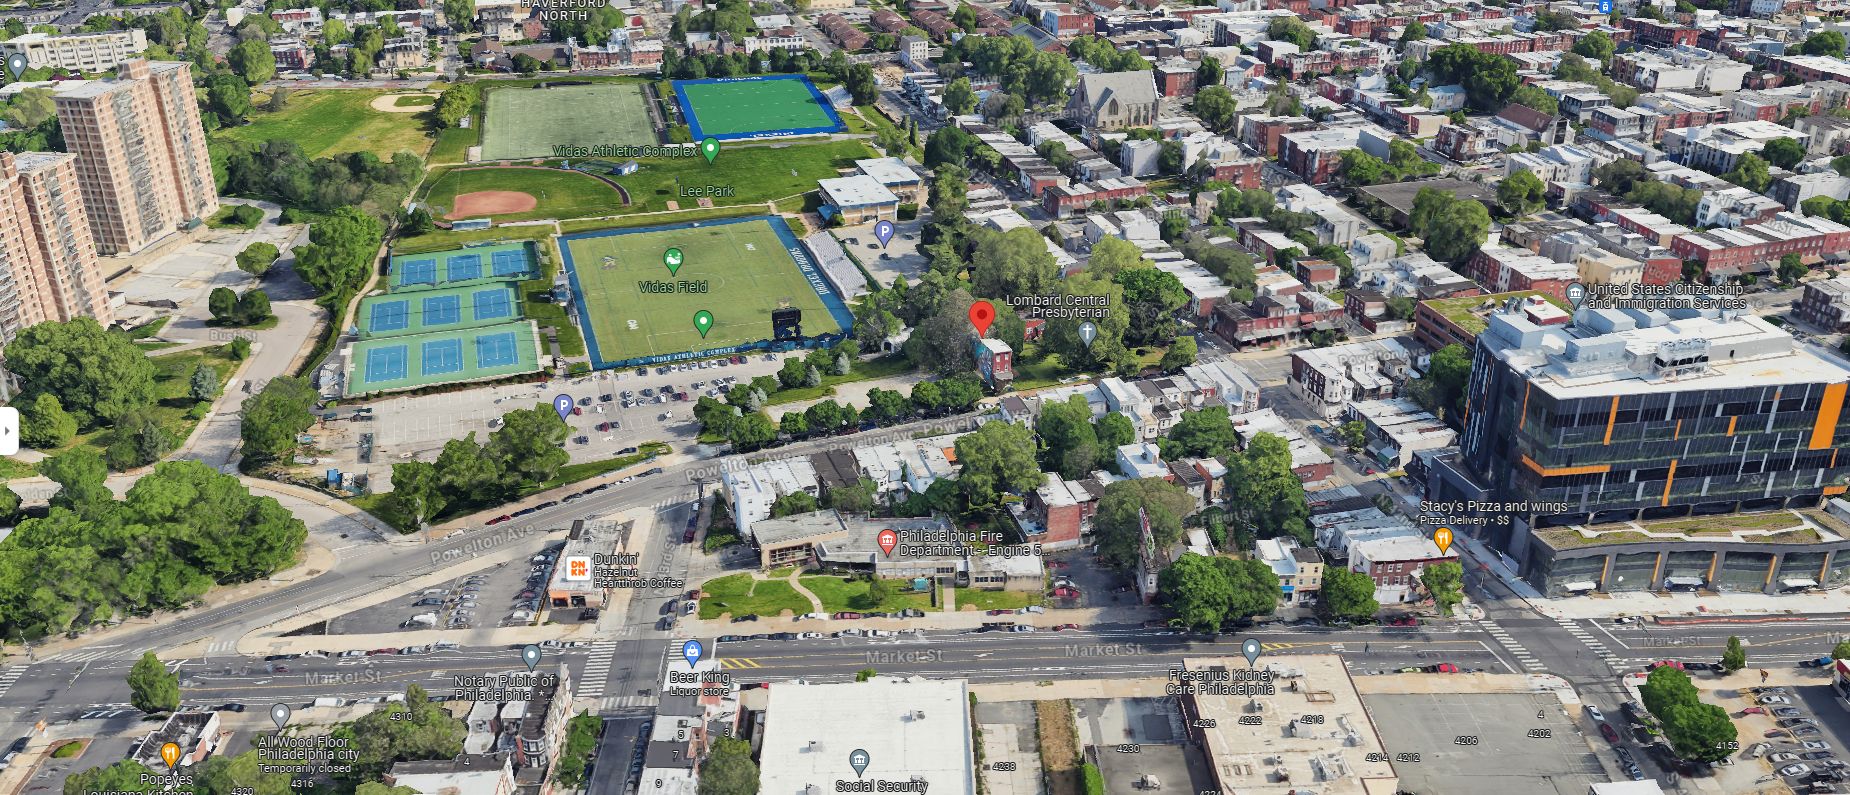 4223 Powelton Avenue. Aerial view prior to redevelopment. Looking north. Credit: Google Maps